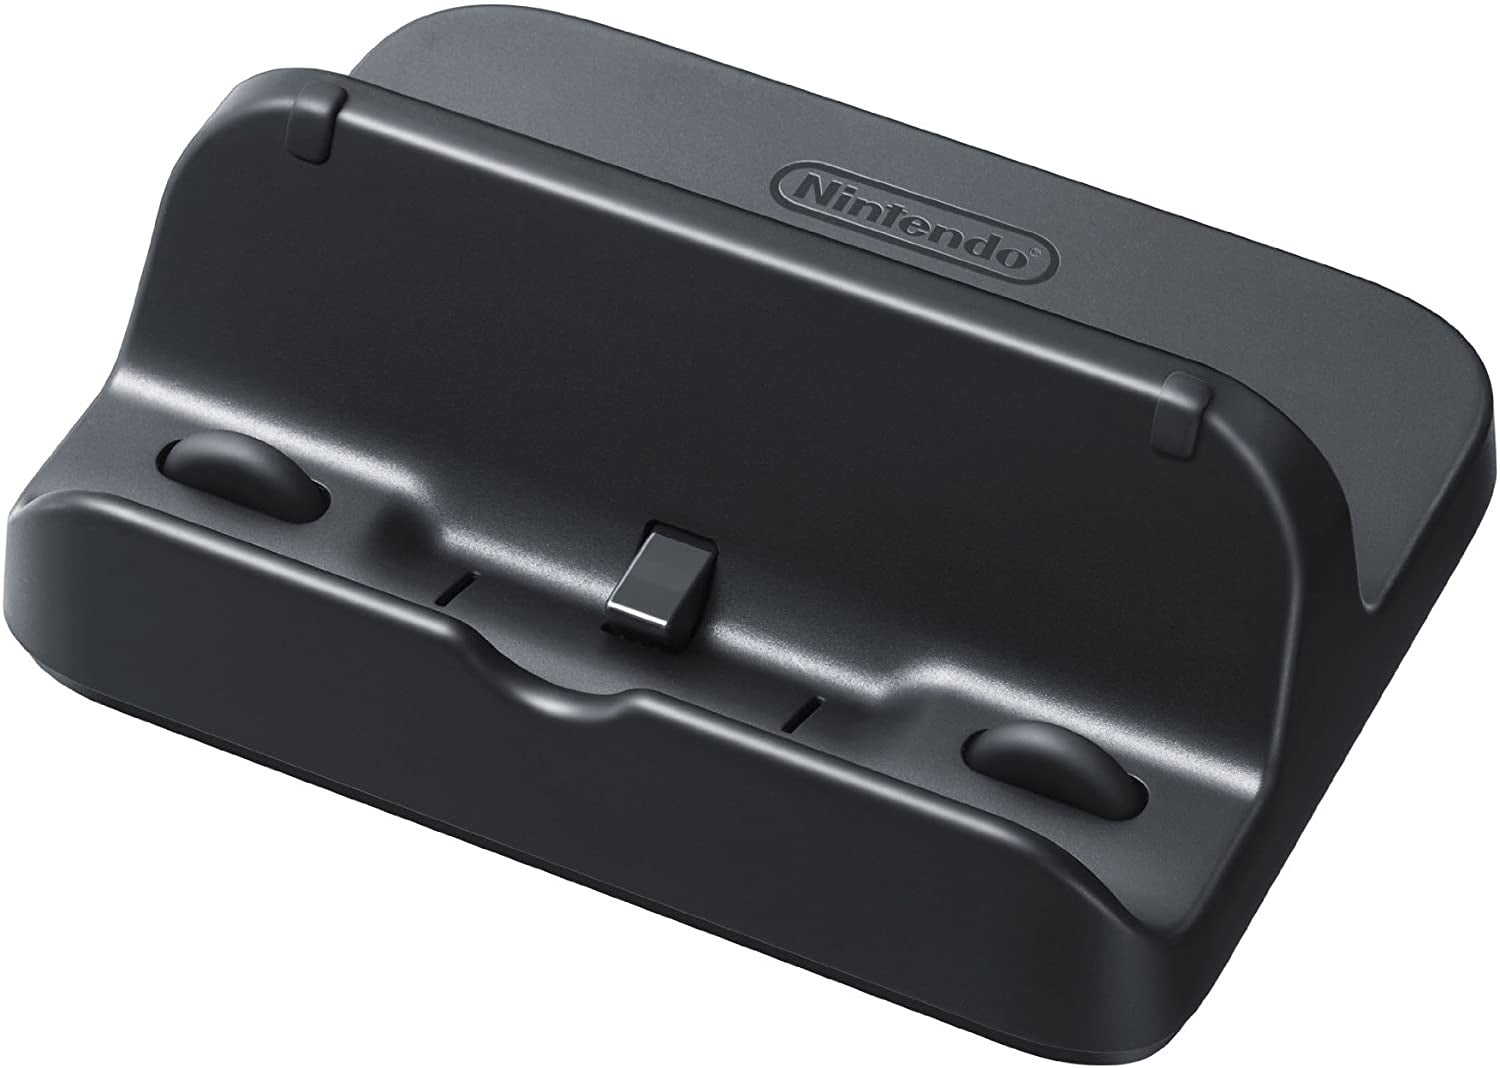 Official Nintendo GamePad Cradle Dock Station (No Adapter) - Wii U (Pre-owned)